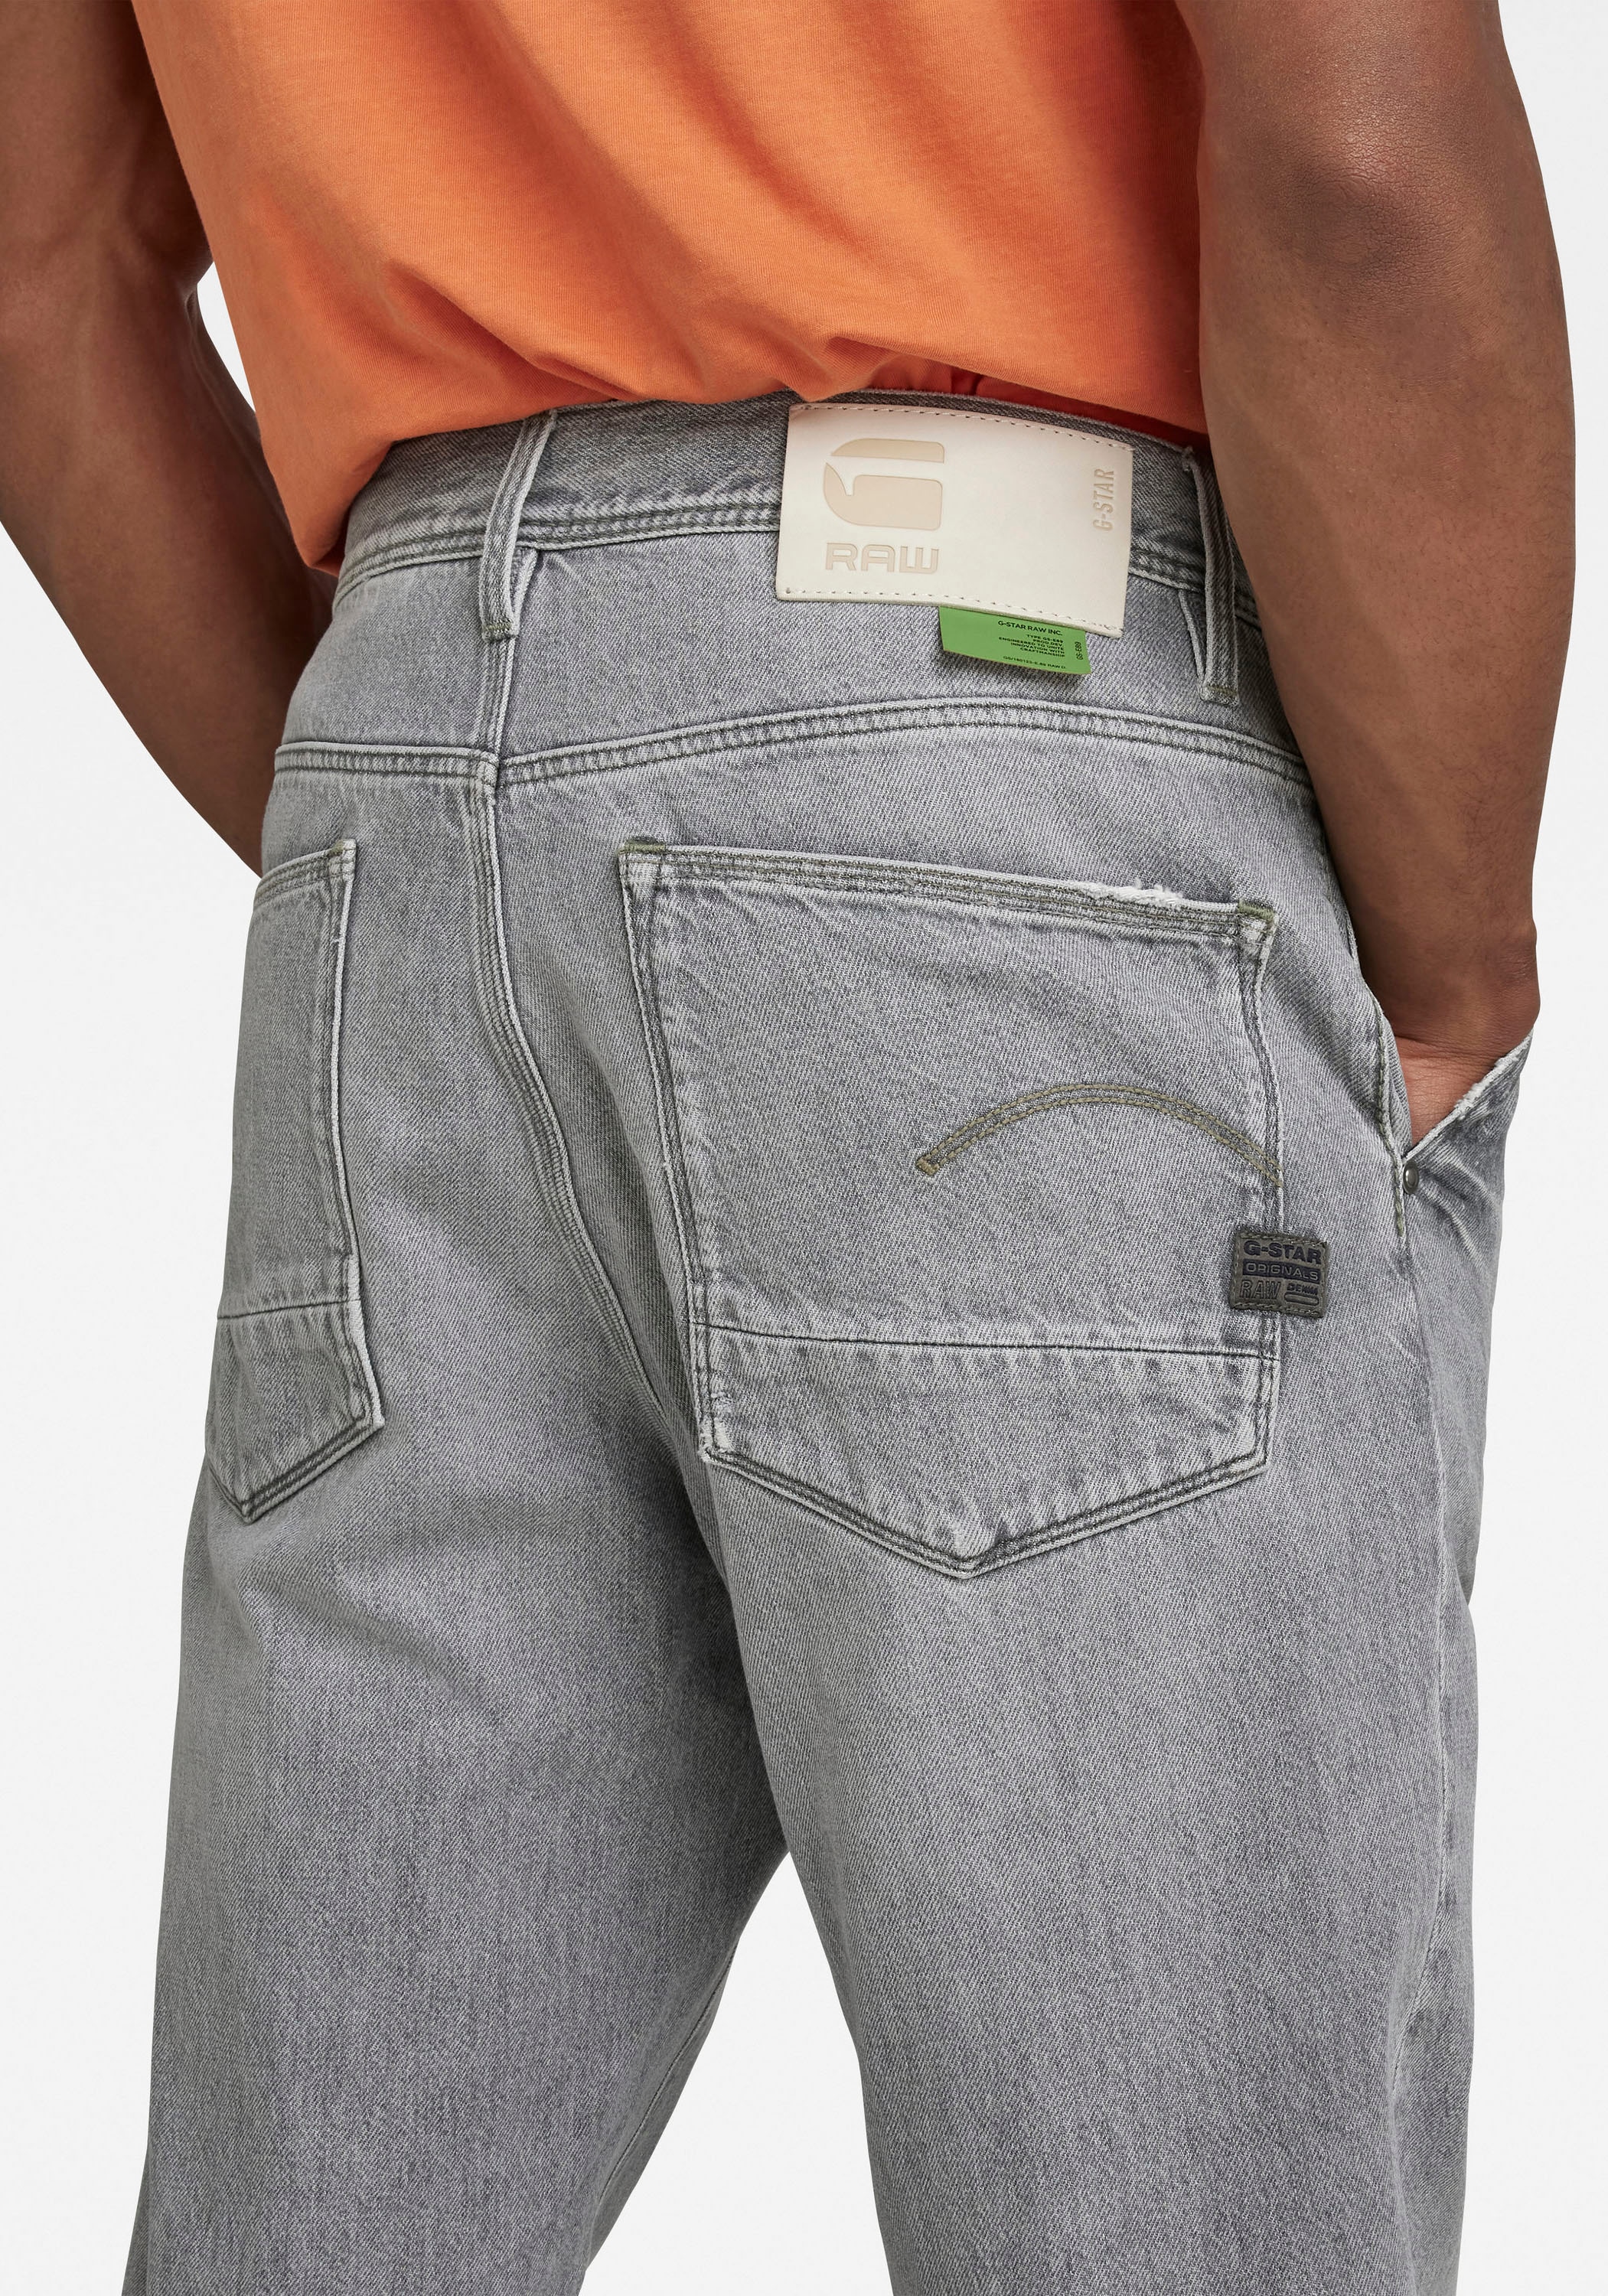 Grip RAW G-Star | online »Relaxed Jelmoli-Versand 3d« Tapered-fit-Jeans Tapered shoppen